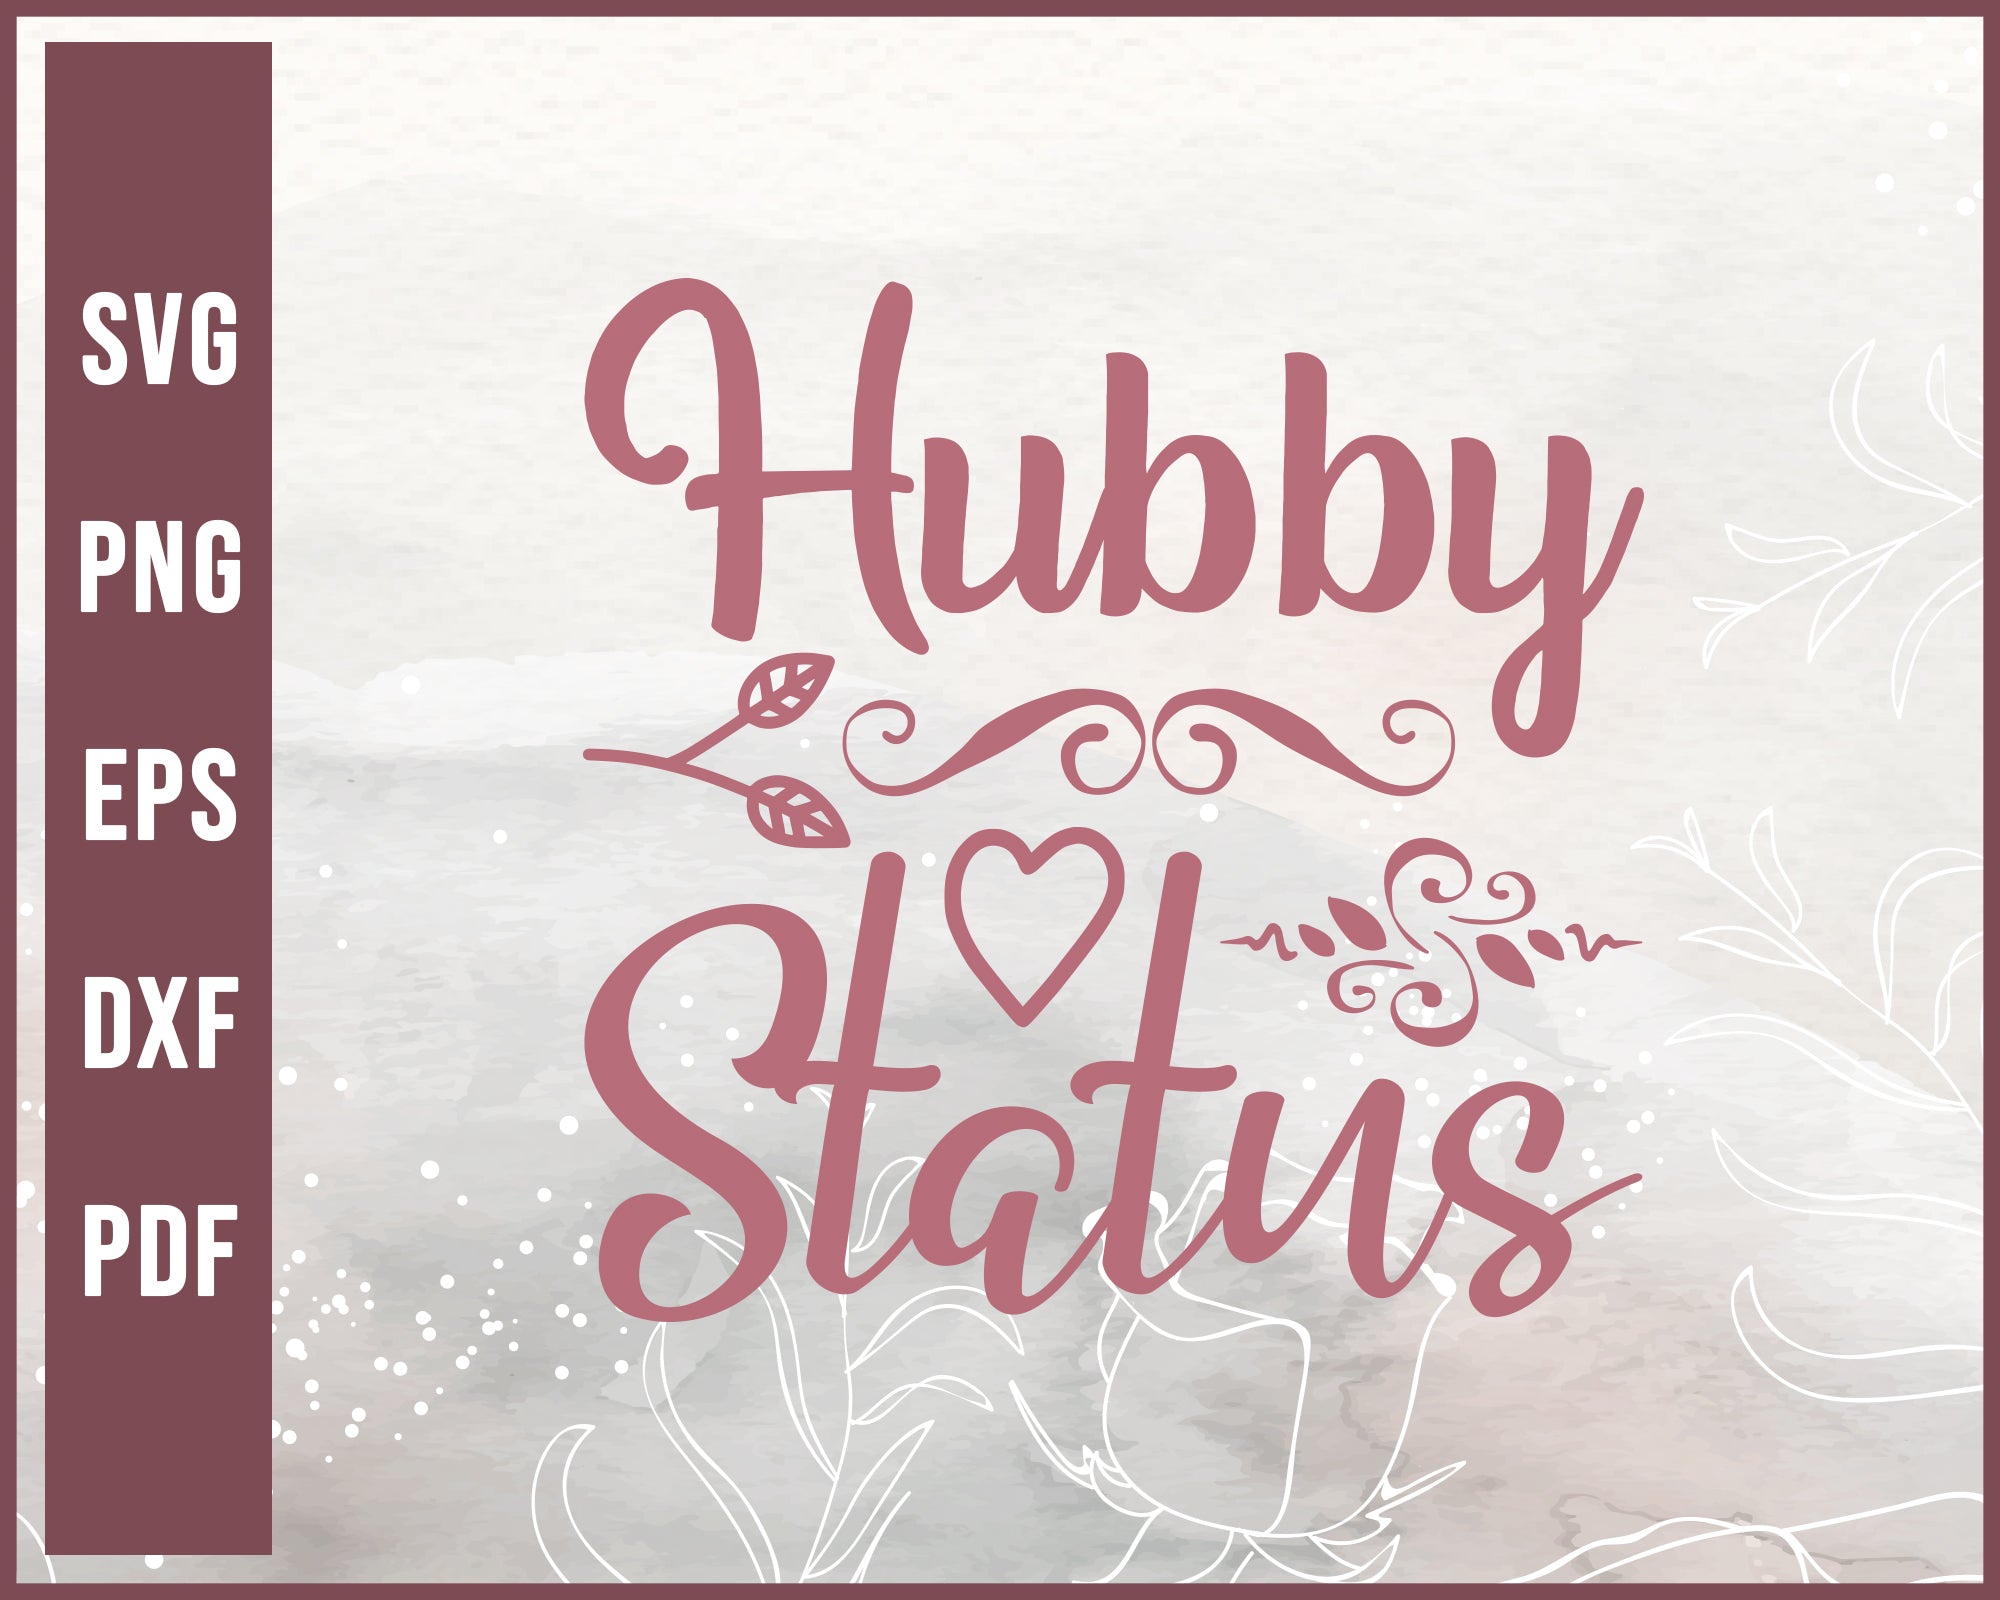 Hubby Status Wedding svg Designs For Cricut Silhouette And eps png Printable Files